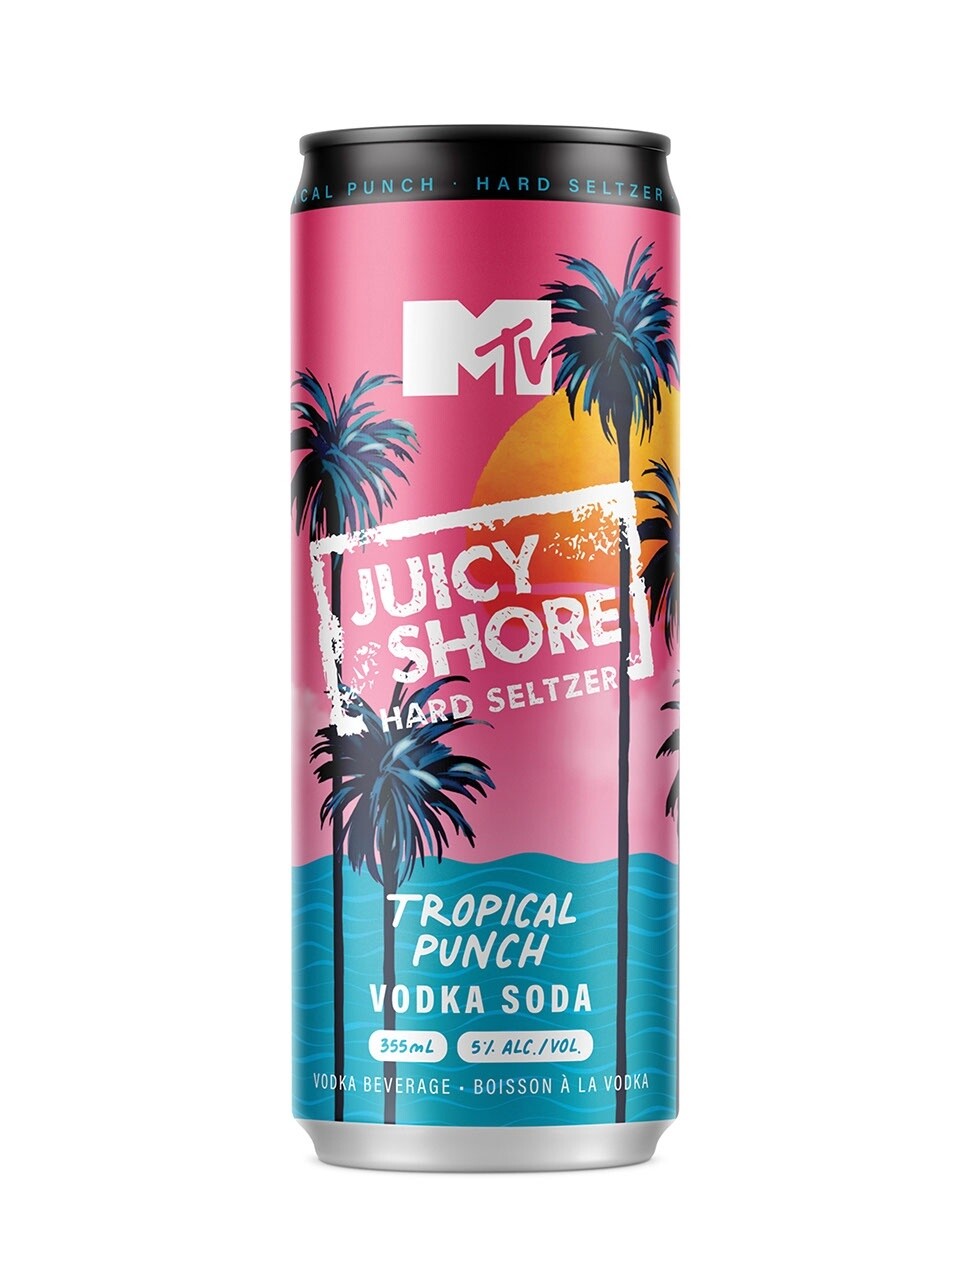 MTV HARD SELTZ TROPICAL PUNCH, Size: 1 Can